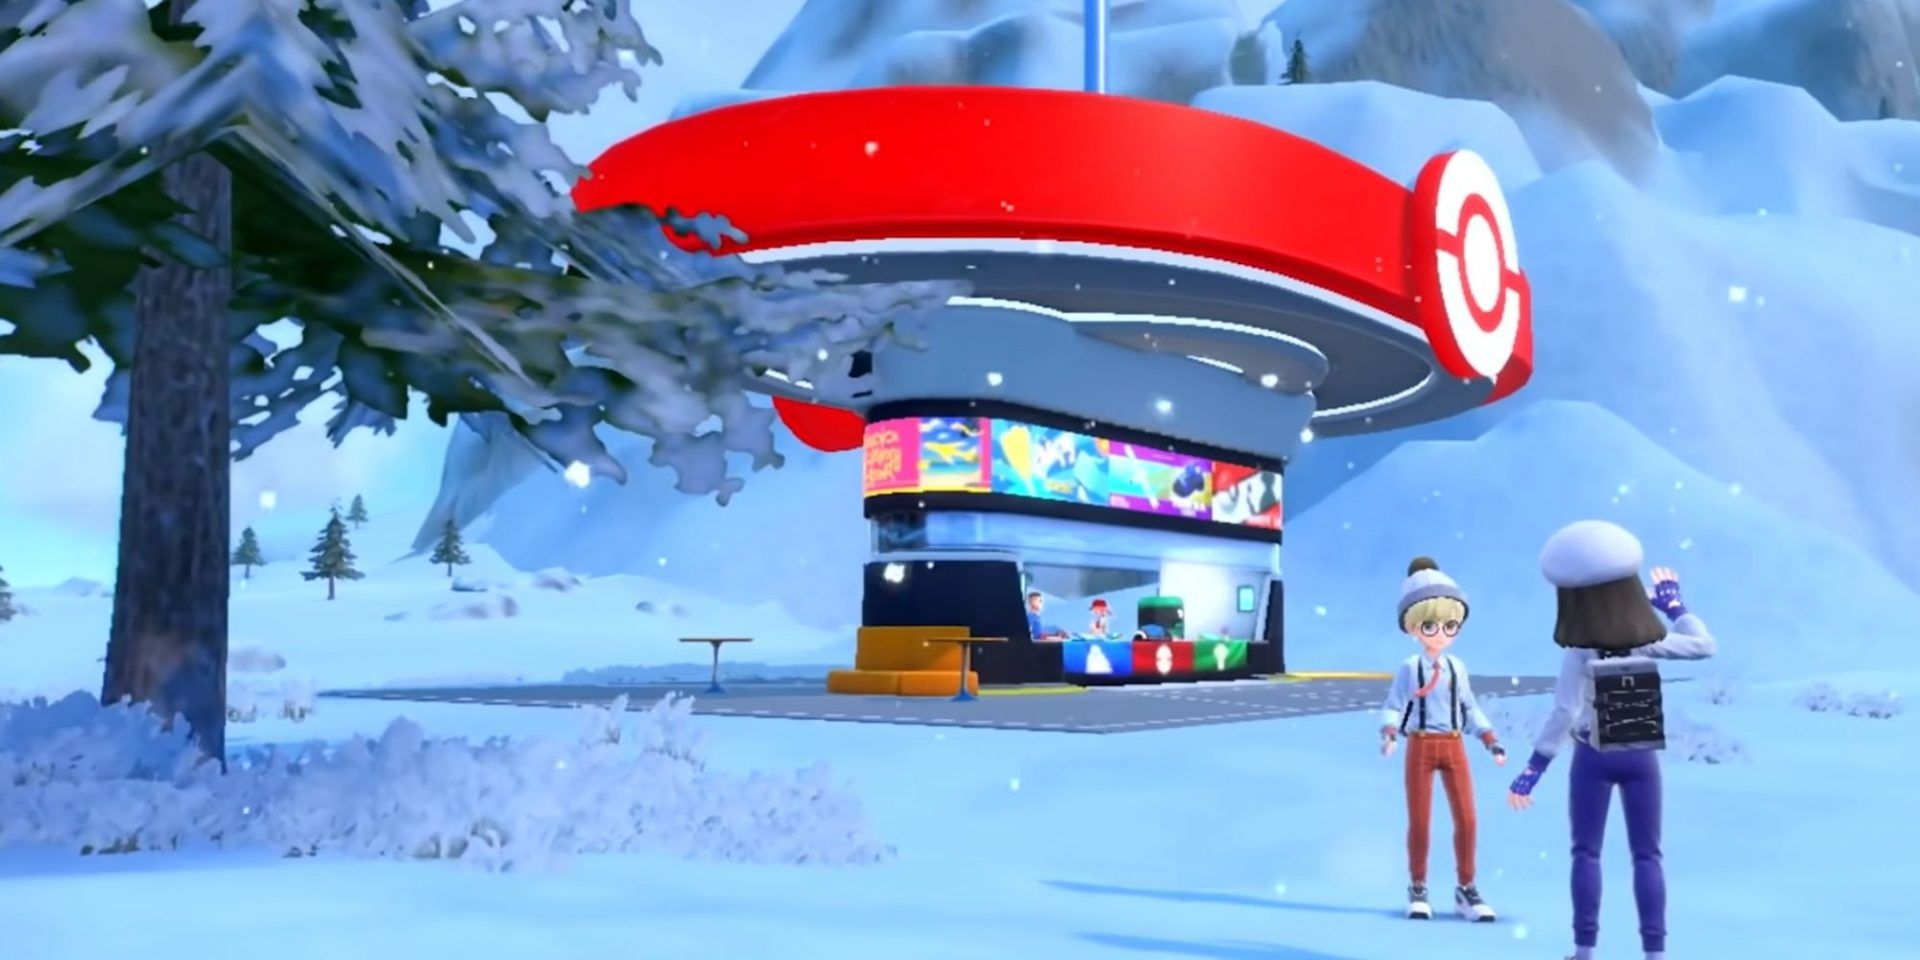 A screenshot from the second trailer of Pokémon Scarlet & Violet that features a Pokémon centre and two characters.